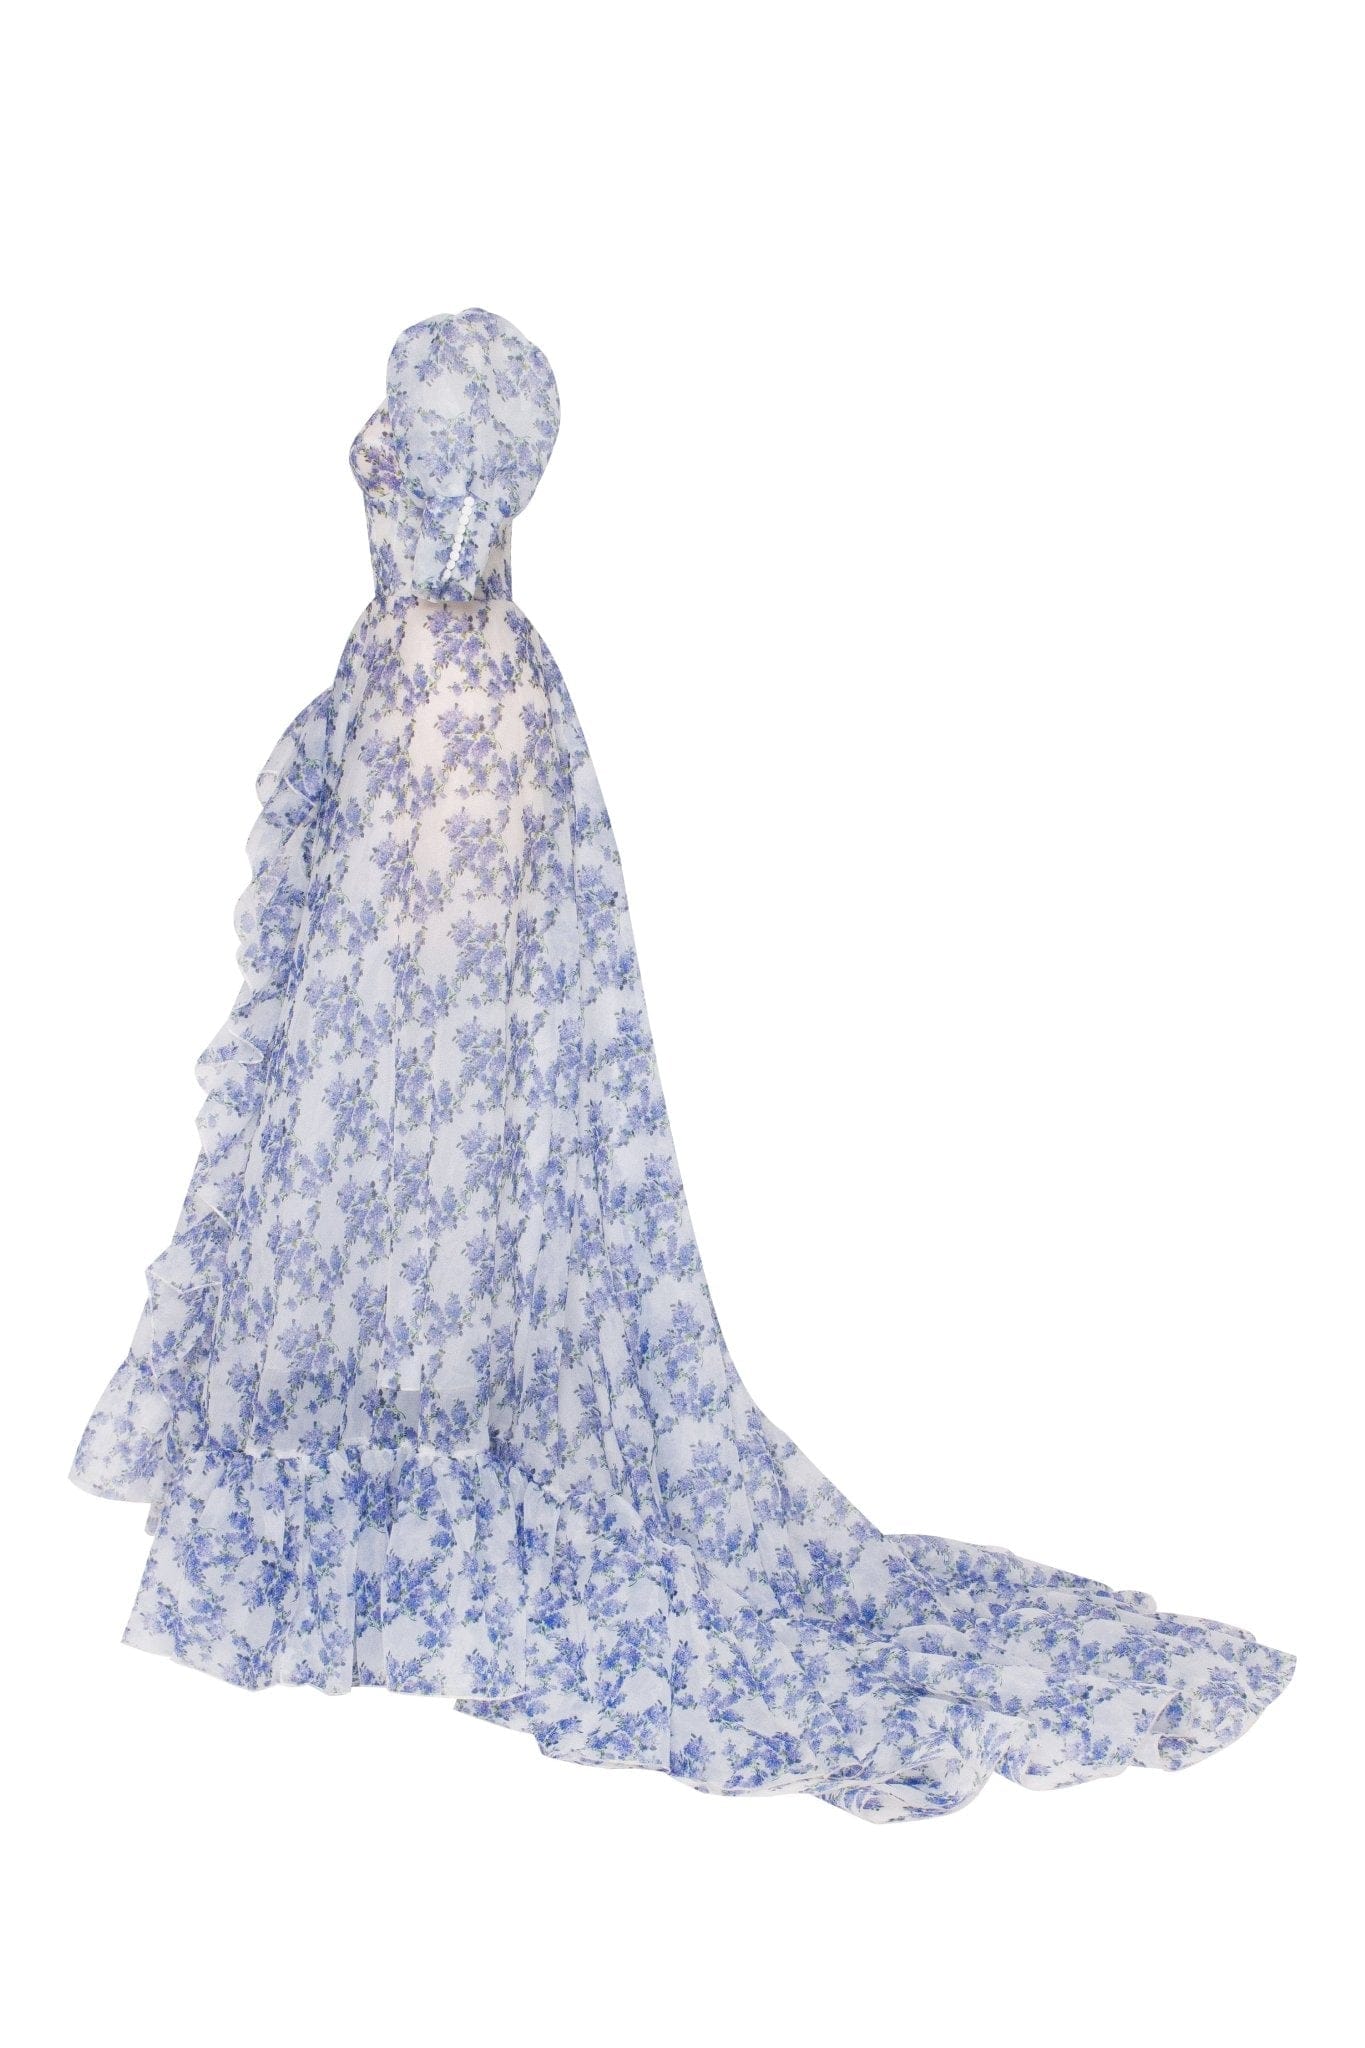 Premium Photo | Beautiful victorian princess design dress in blue colours  with flowers pattern